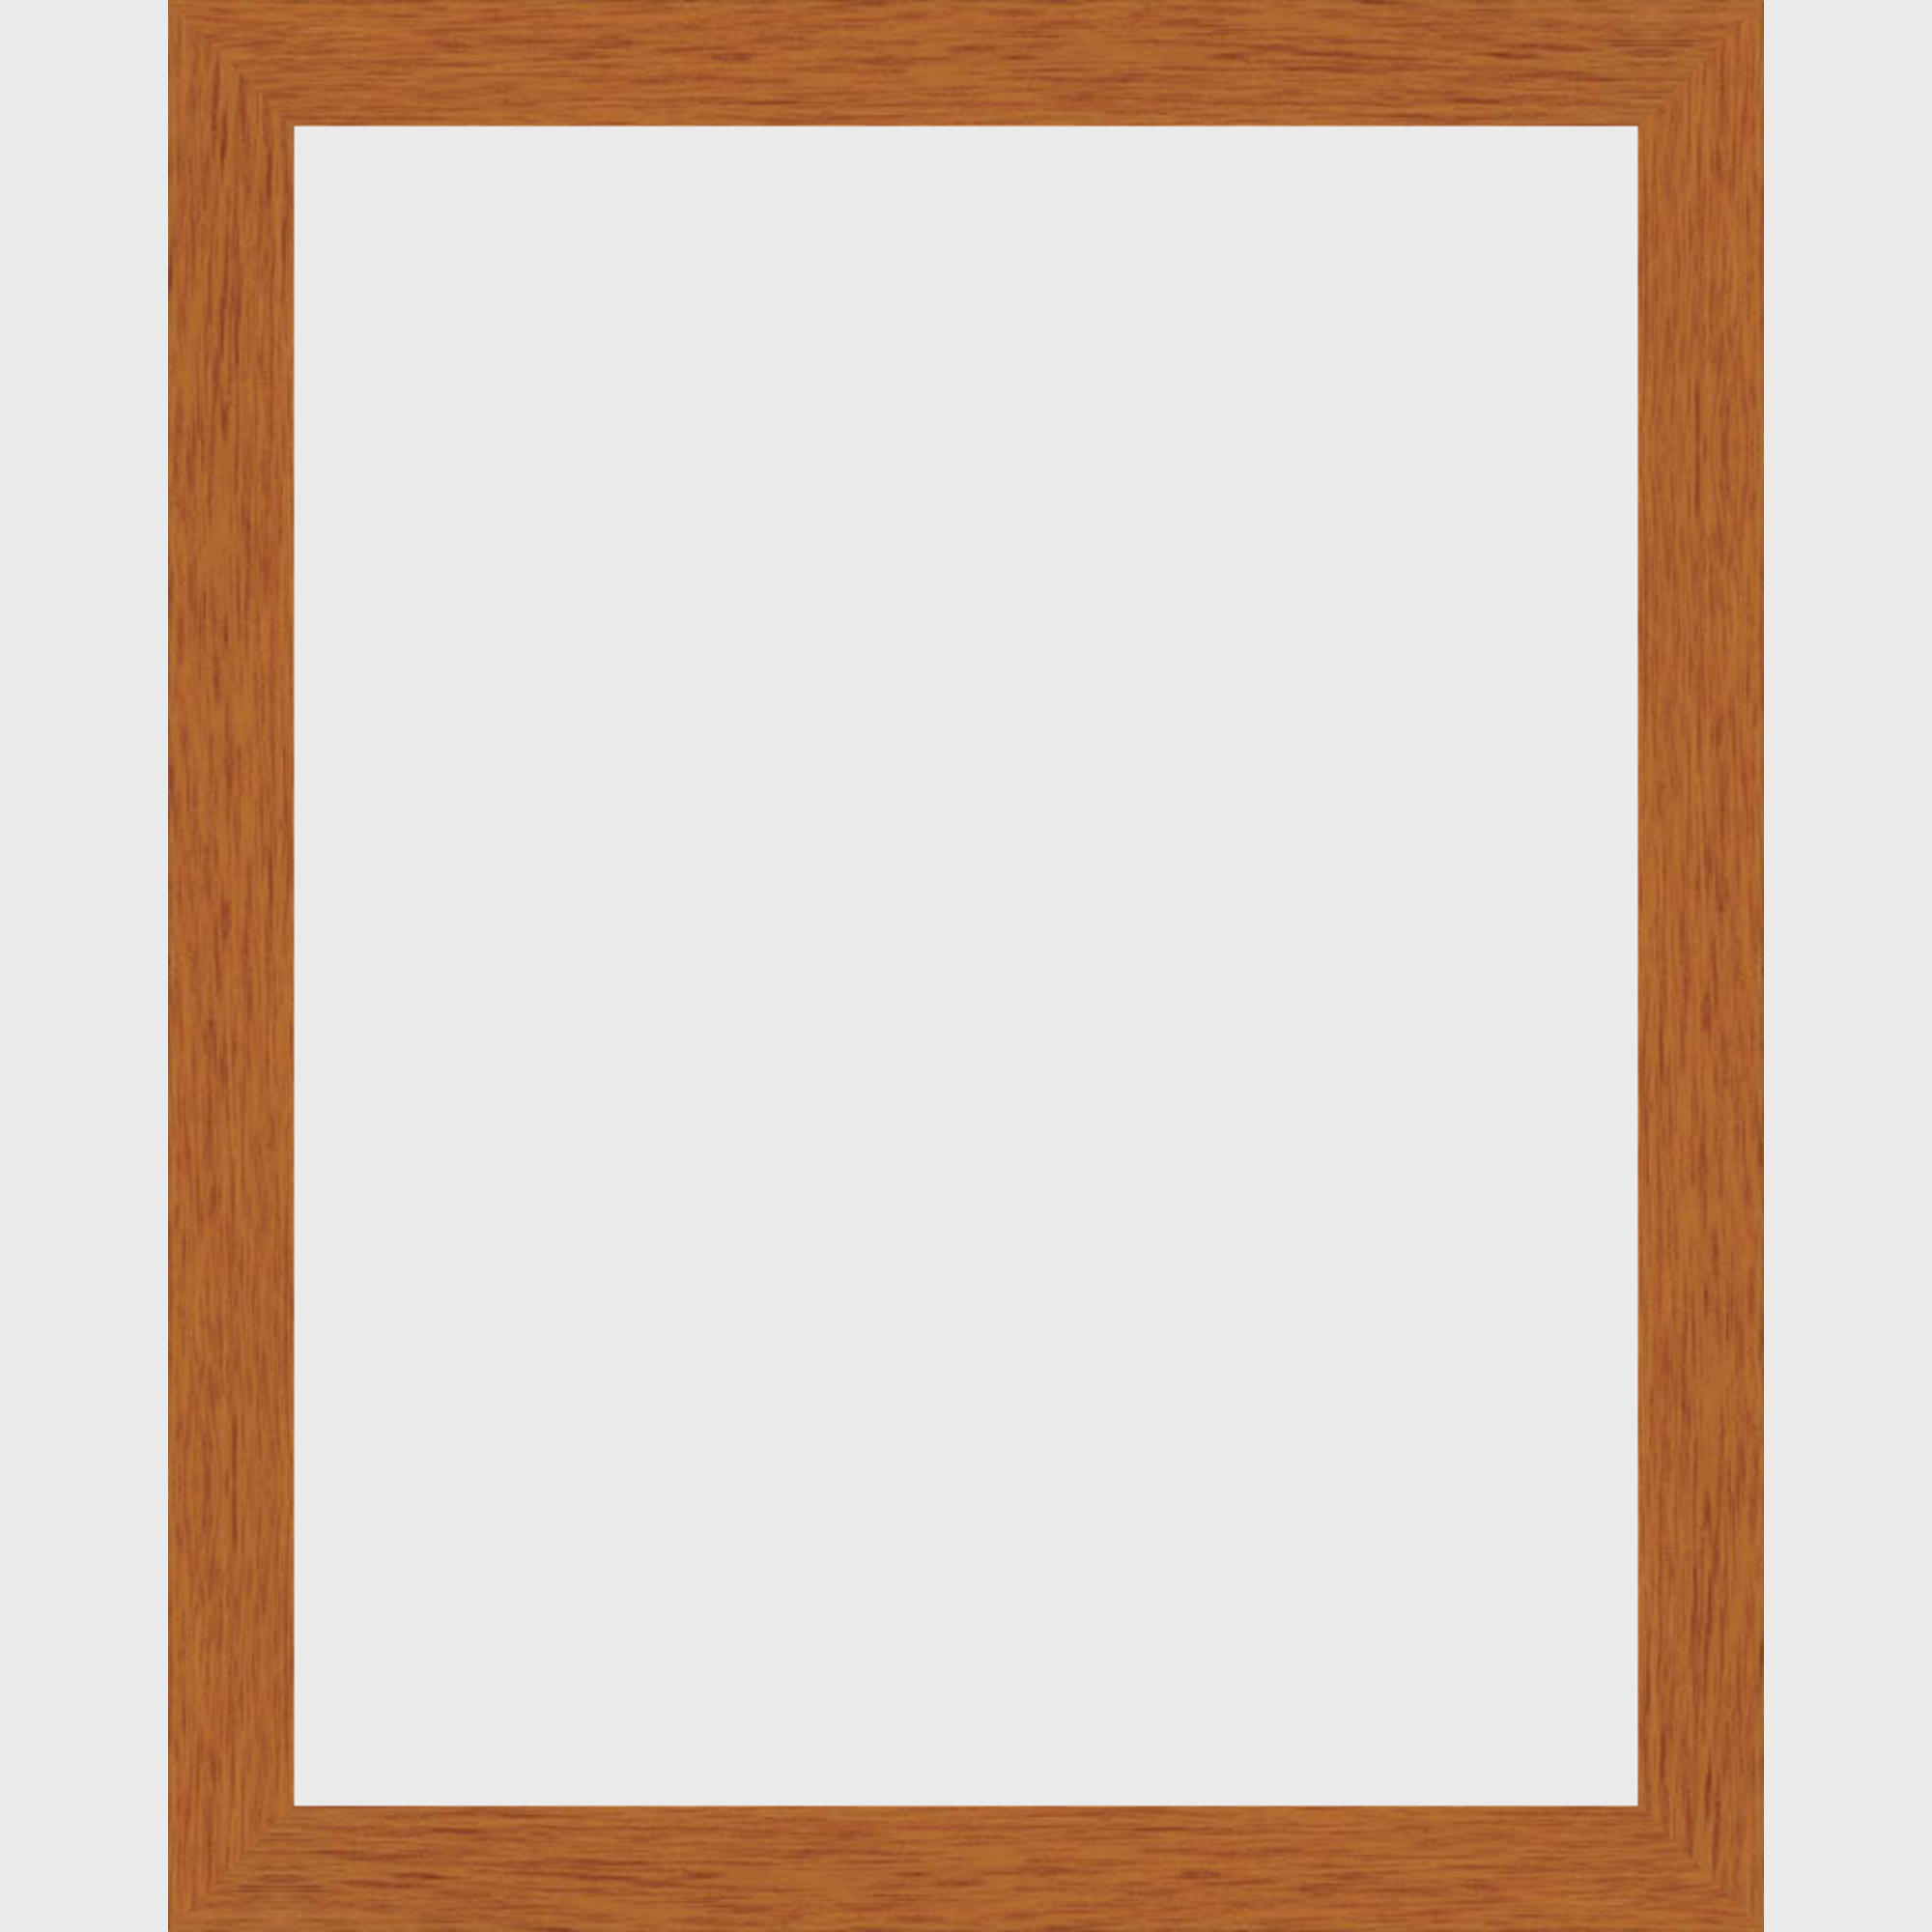 14x19 Honey Pecan Wood Picture Frame With Acrylic Front and Foam Board Backing